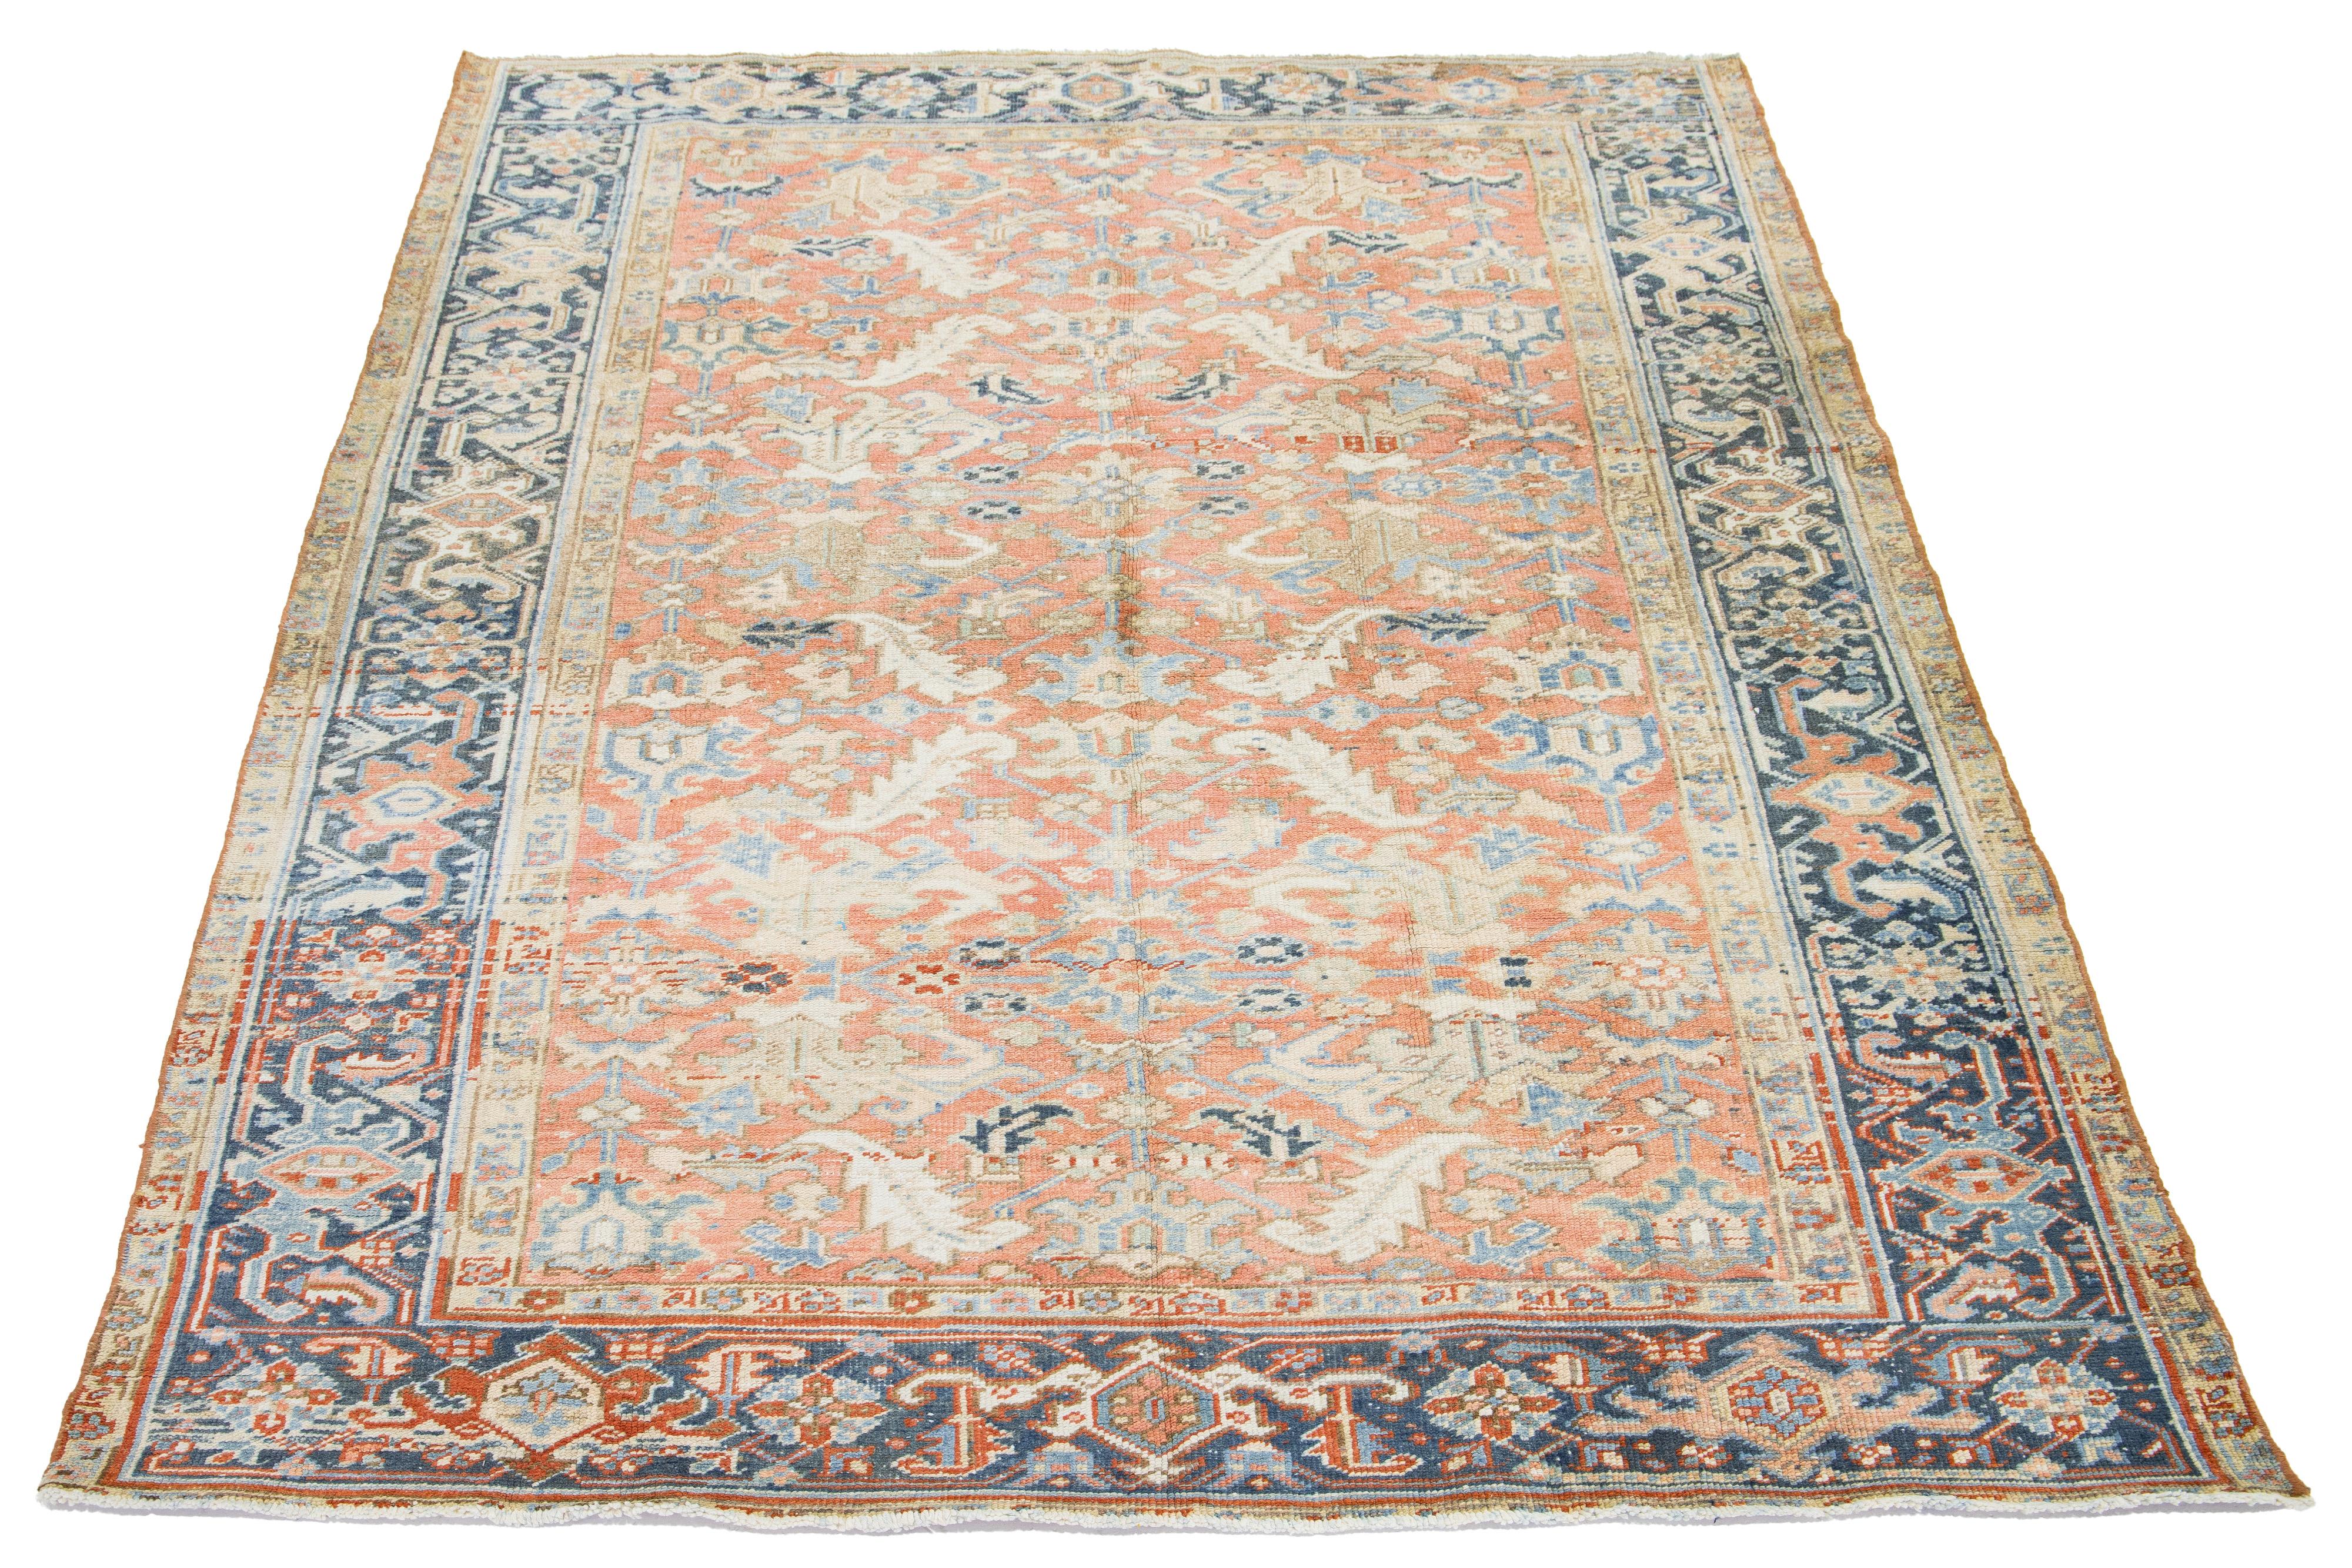 An antique Persian Heriz wool rug features a blue, beige, and brown pattern on a peach background.

This rug measures 6'9' x 9'4